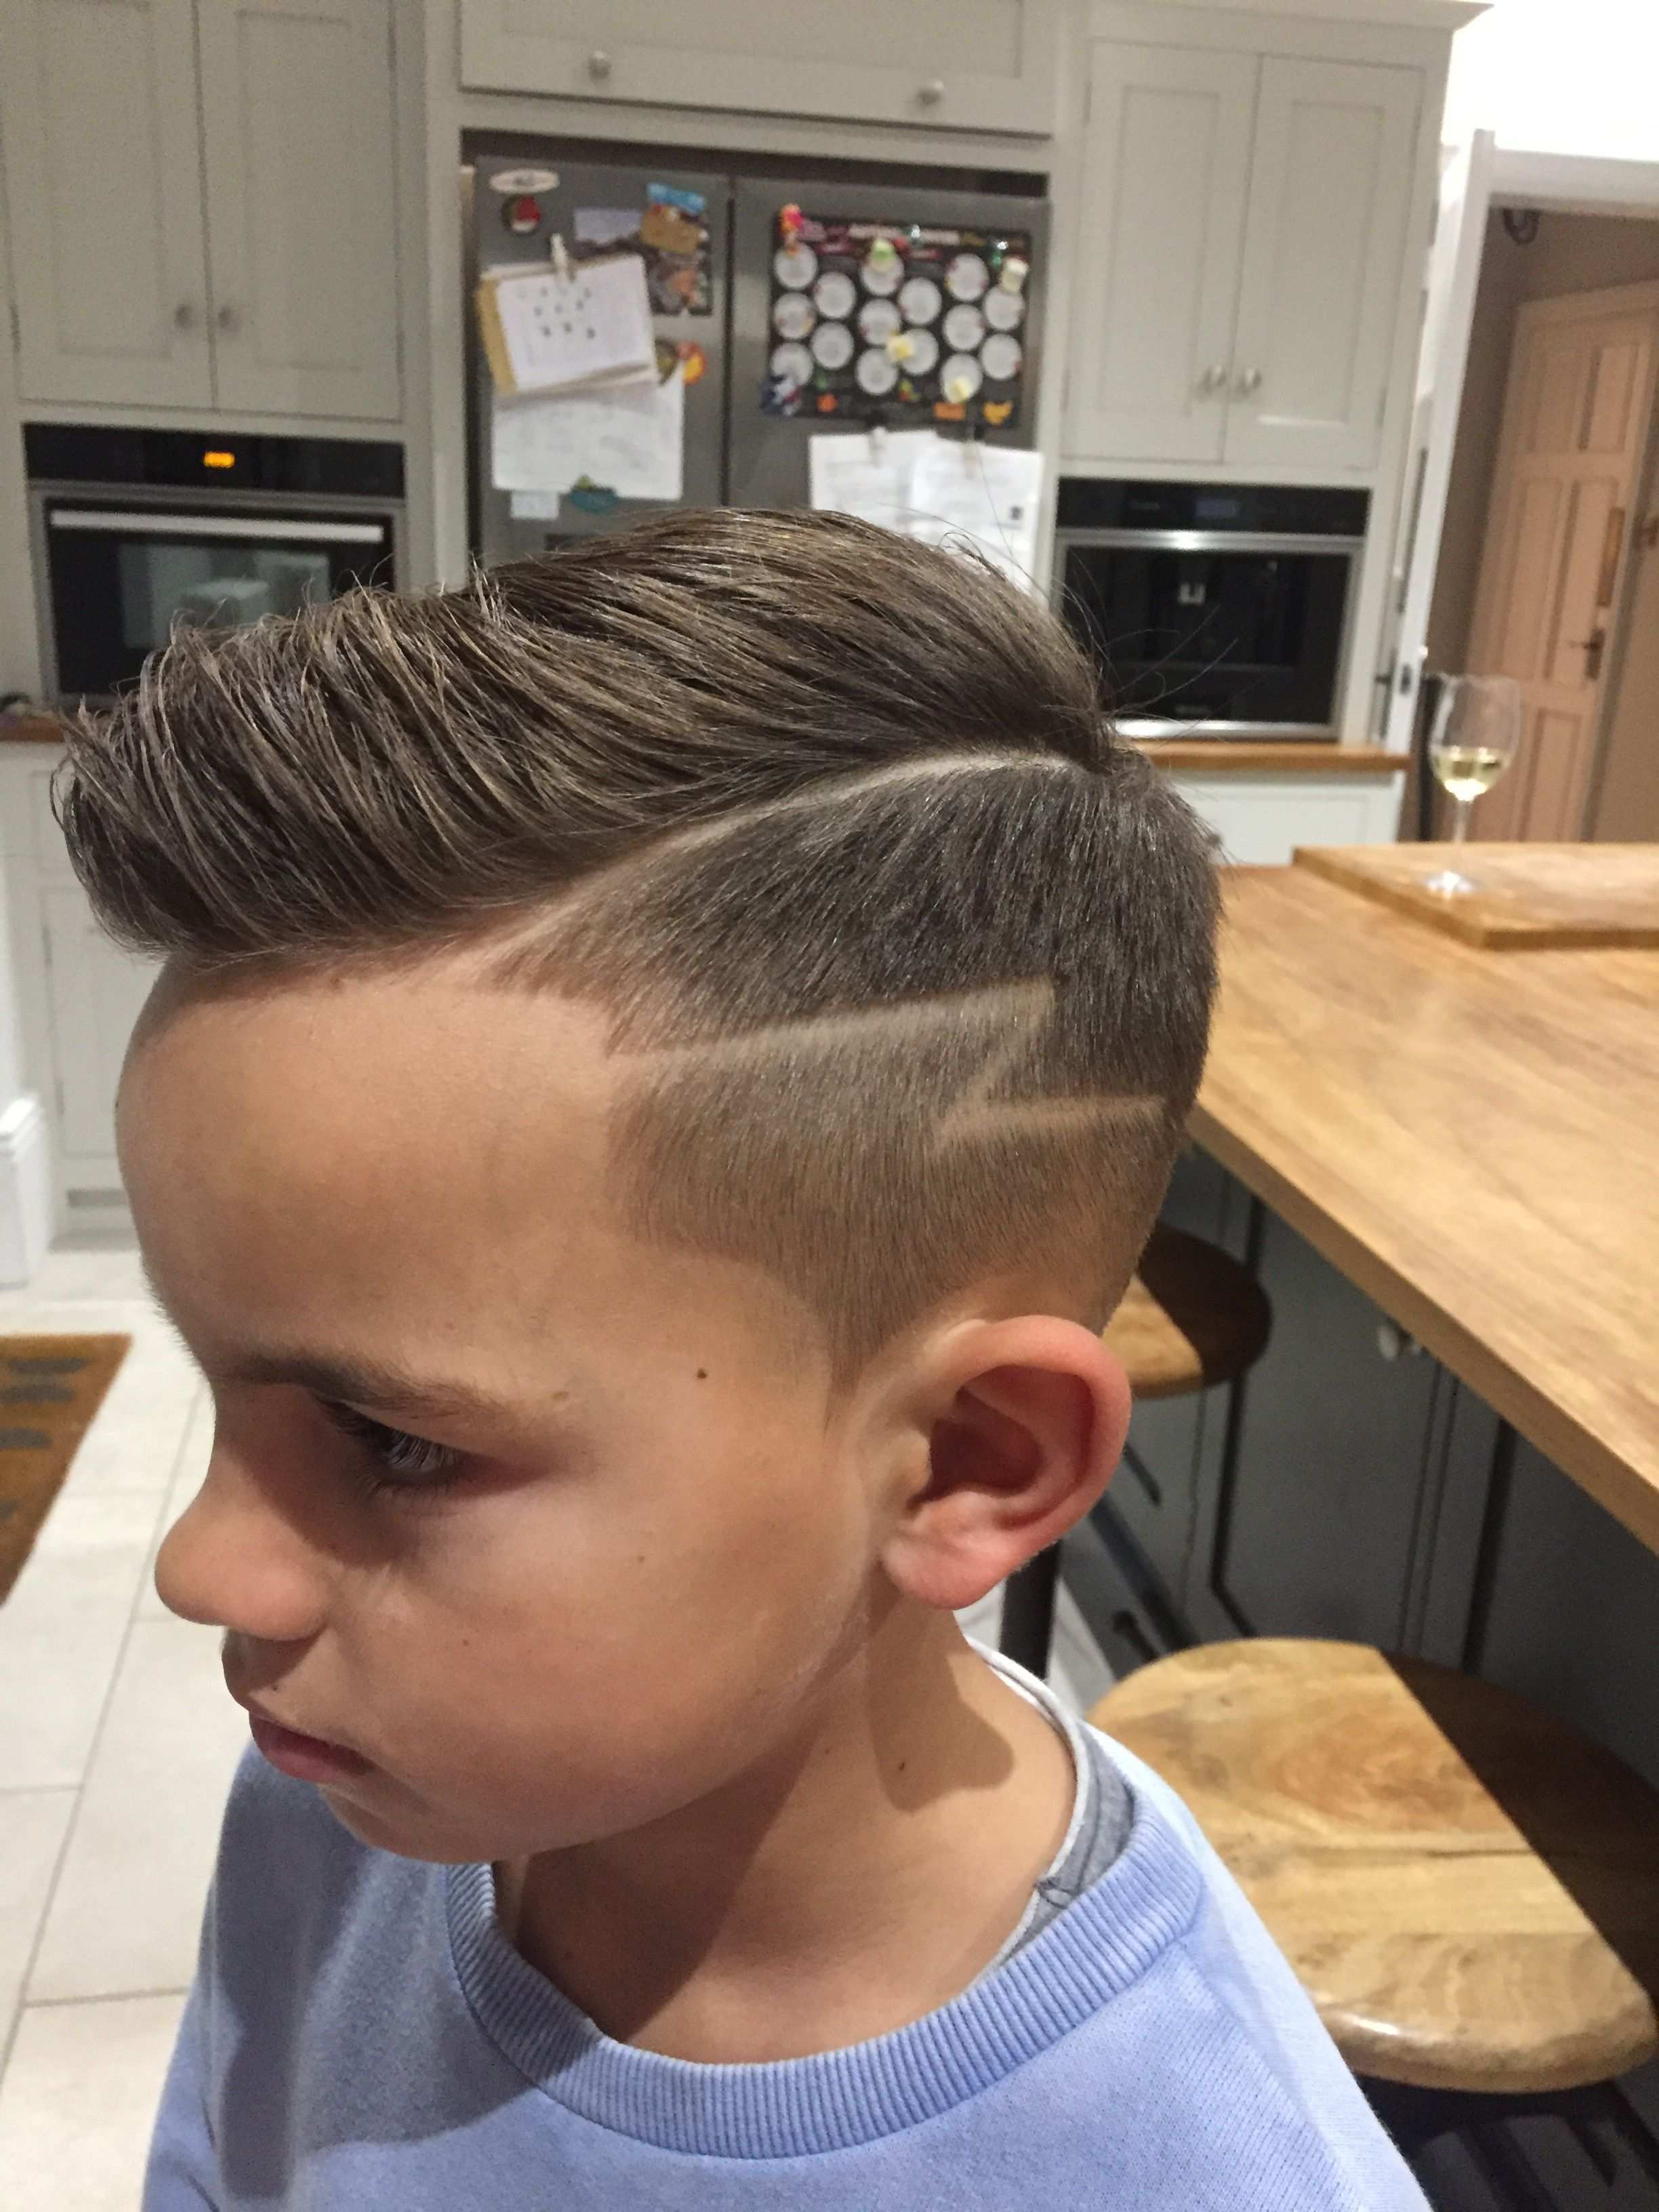 Boys Haircut With Lightning Bolt Design Boyshaircut Roccorex Boys Haircut Styles Boys Haircuts Boy Hairstyles